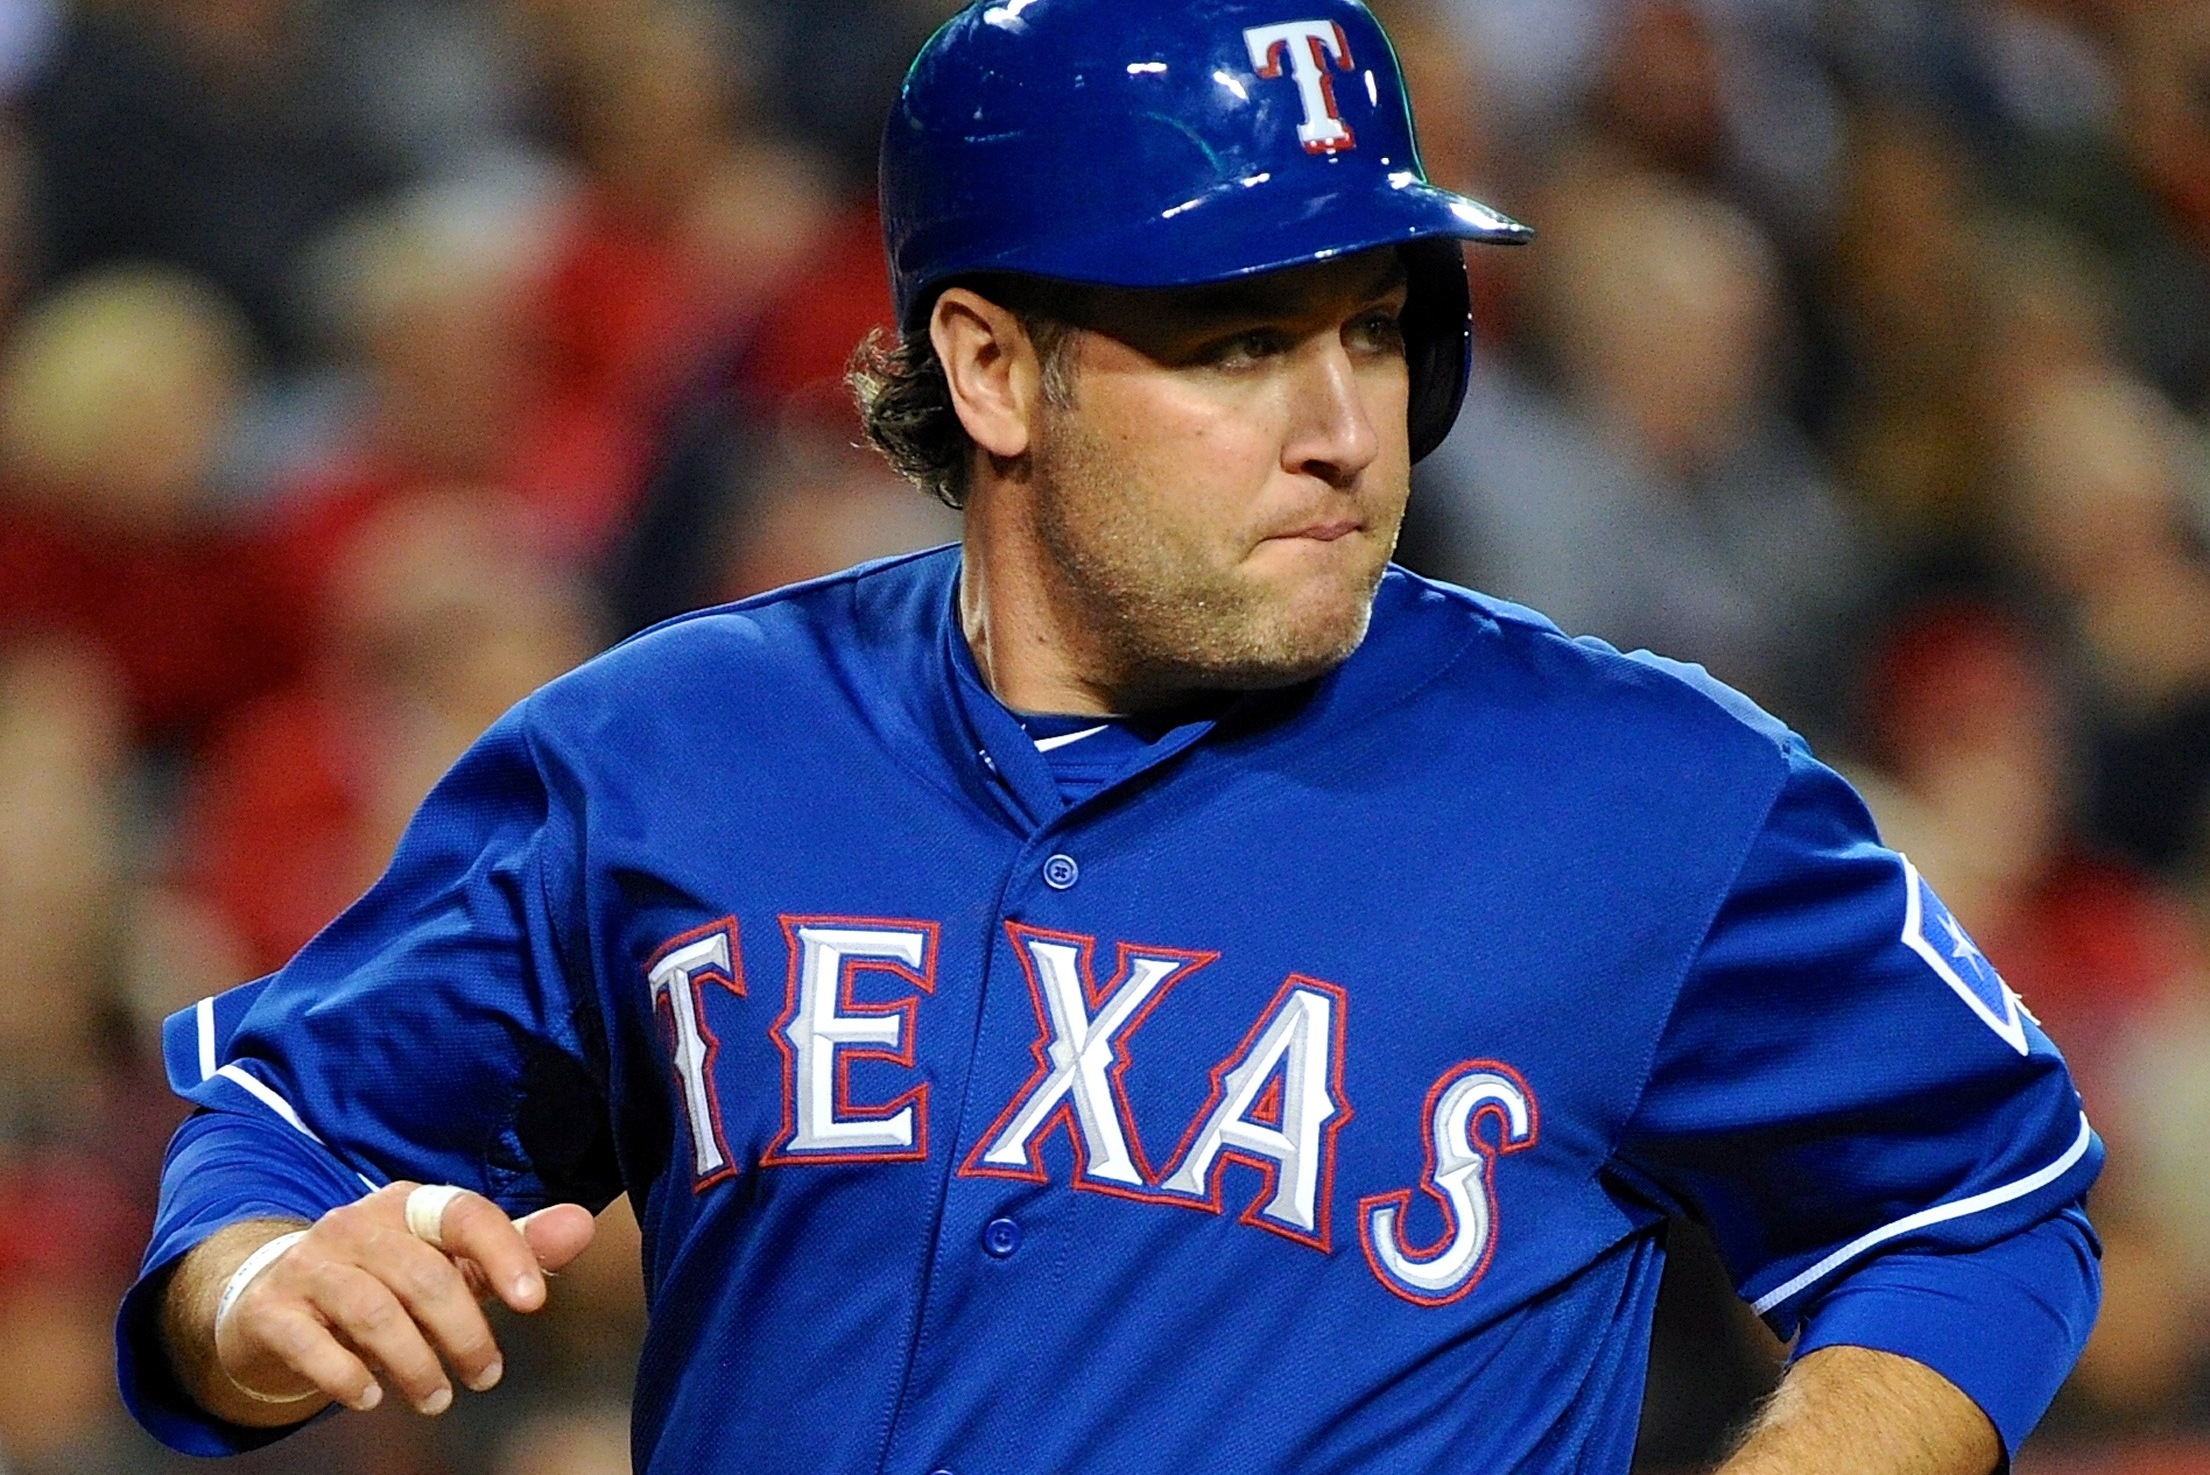 Lance Berkman interested in returning to Astros - Sports Illustrated